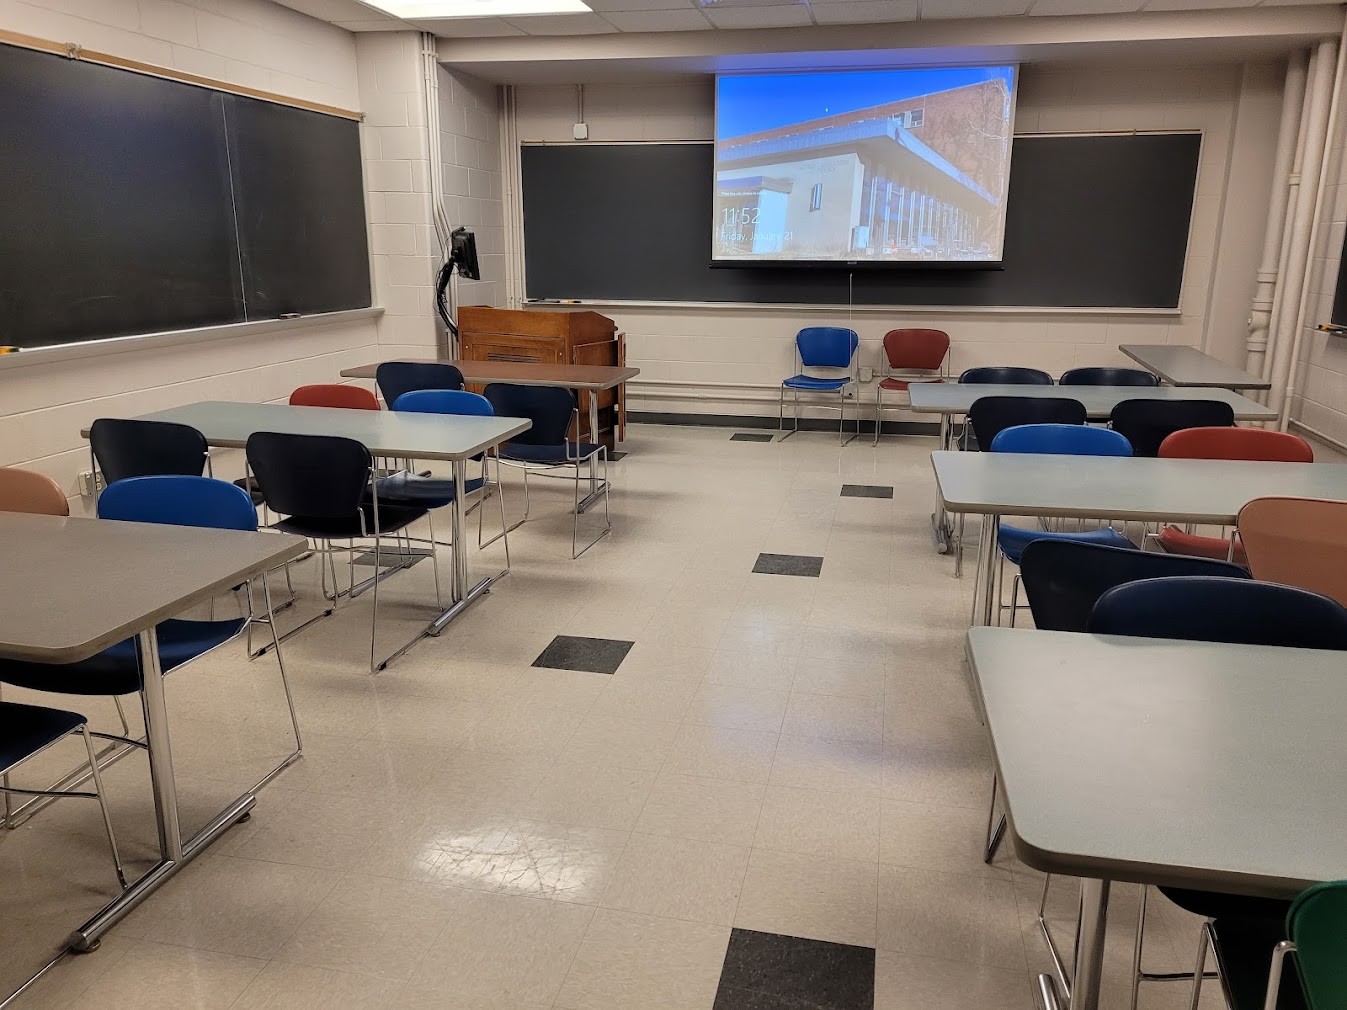 A view of the classroom with movable tables and chairs, chalkboard, and instructor table in front.